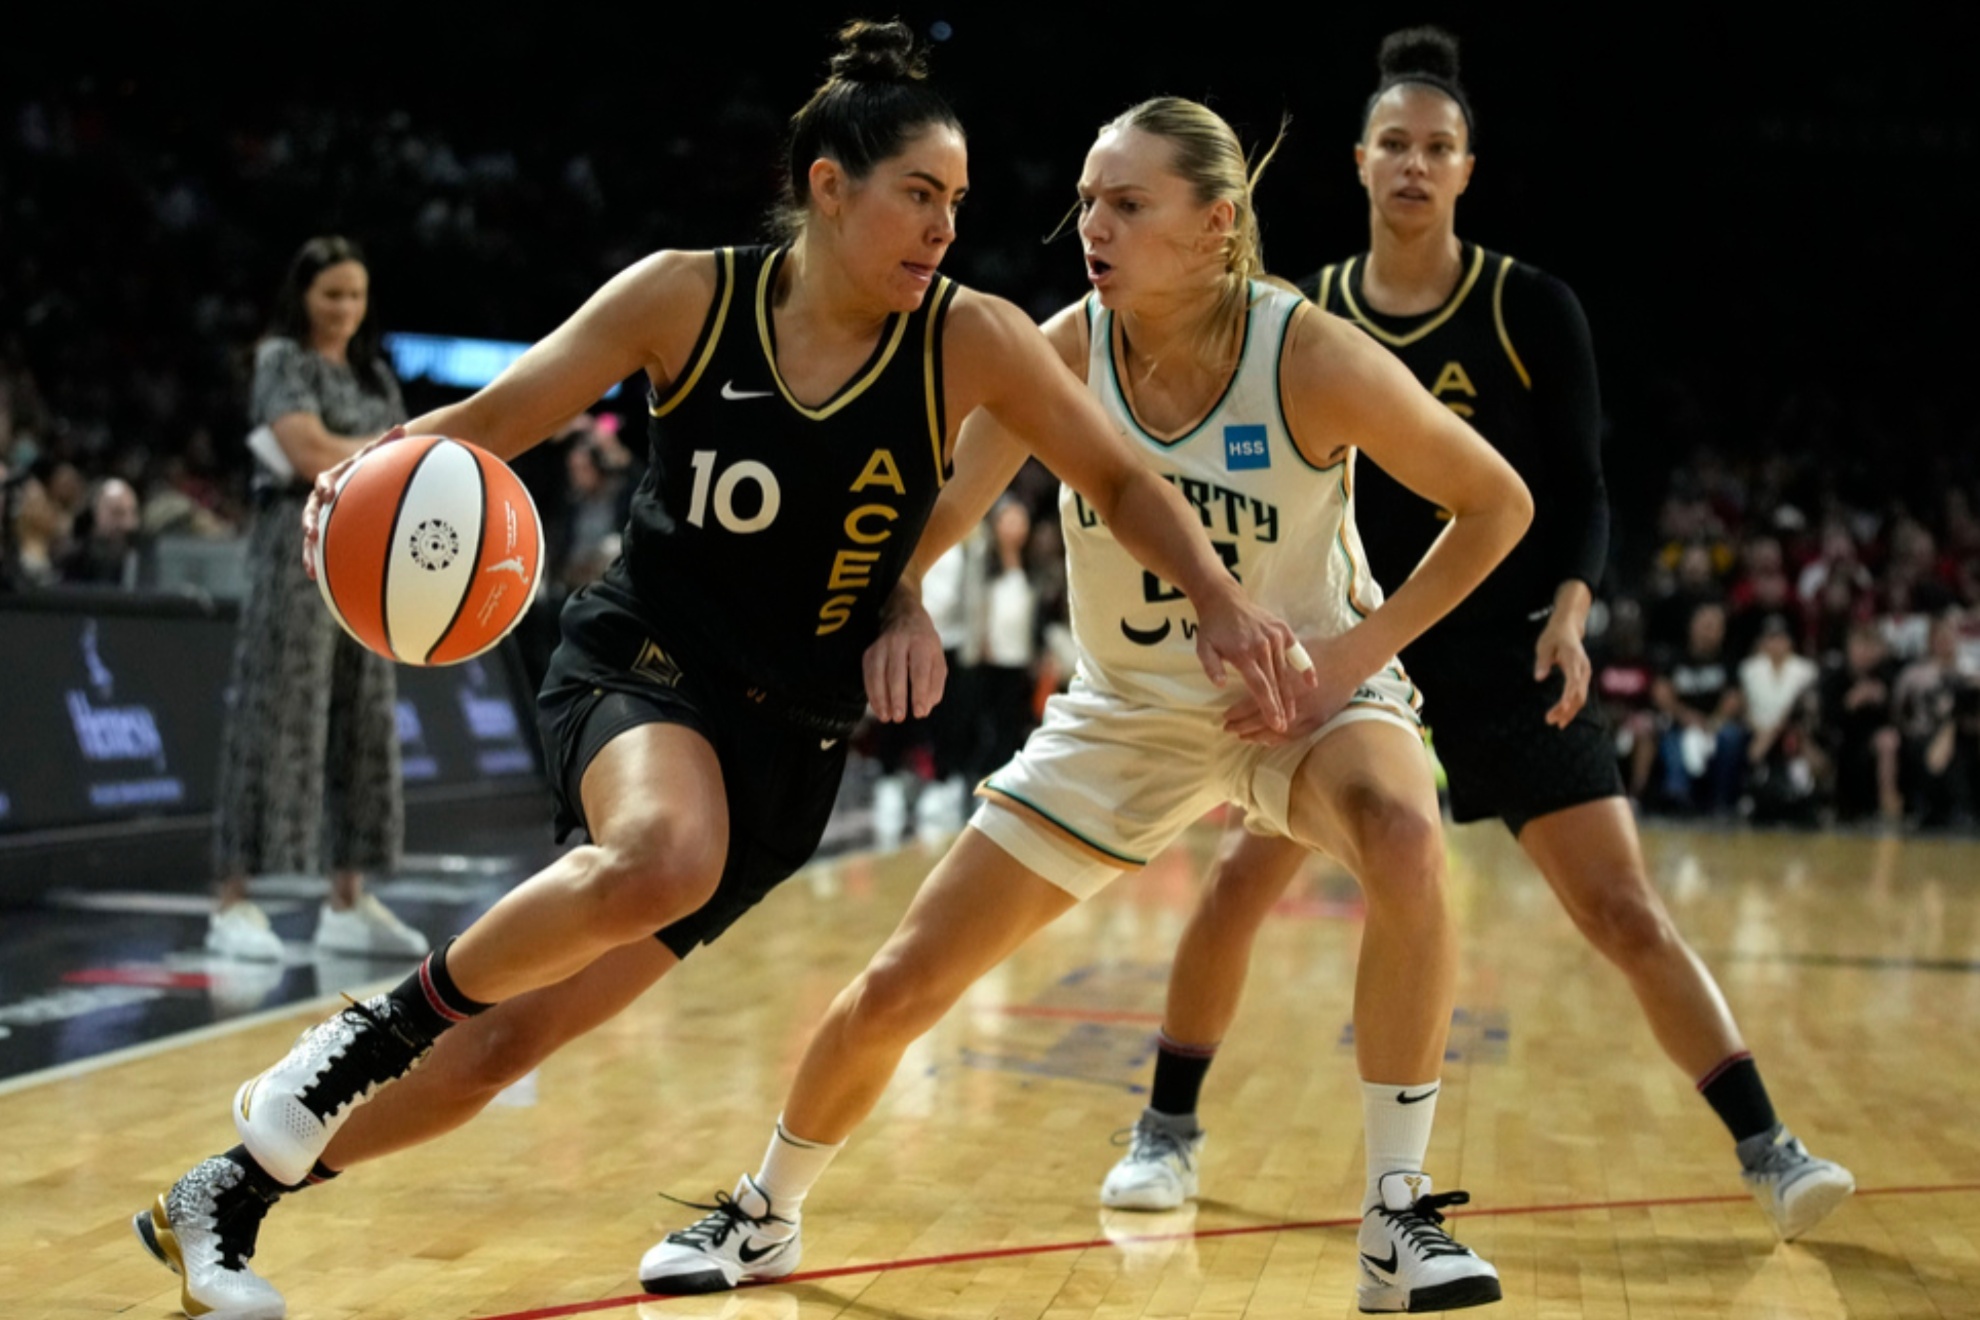 The Las Vegas Aces won Game 1 of the WNBA Finals 99-82 against the New York Liberty